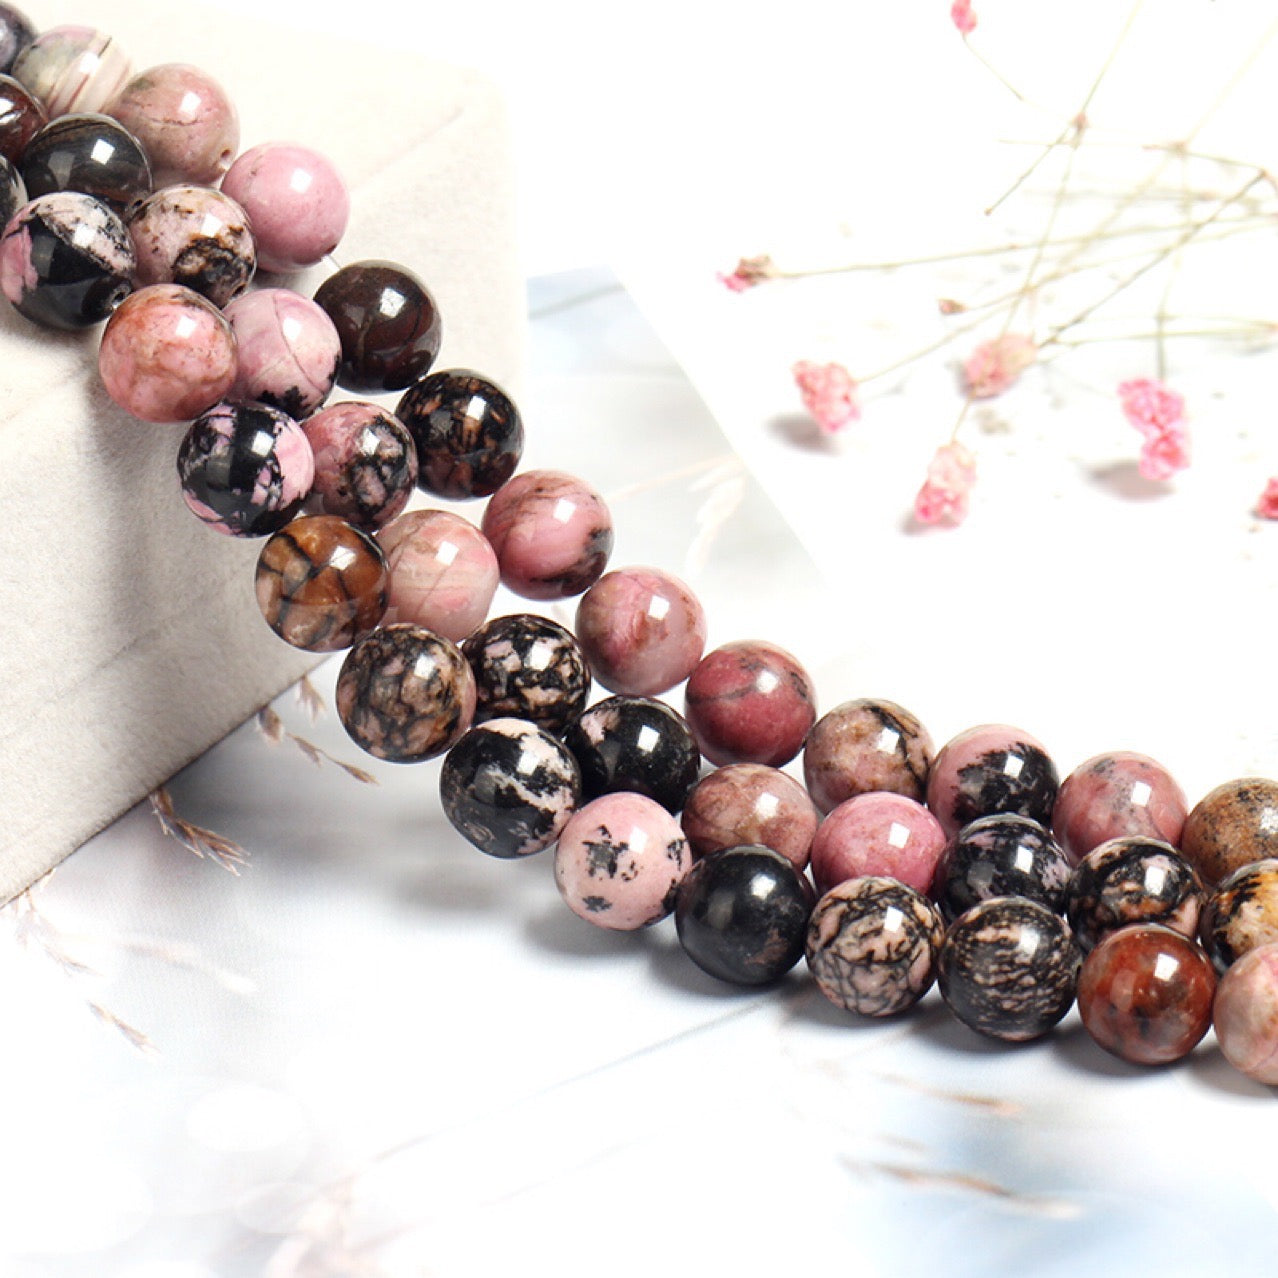 2 Strands/lot 10mm Black Lace Rhodonite Stone Round Beads Stone Beads New Beads Arrivals Other Stone Beads Charms Beads Beyond